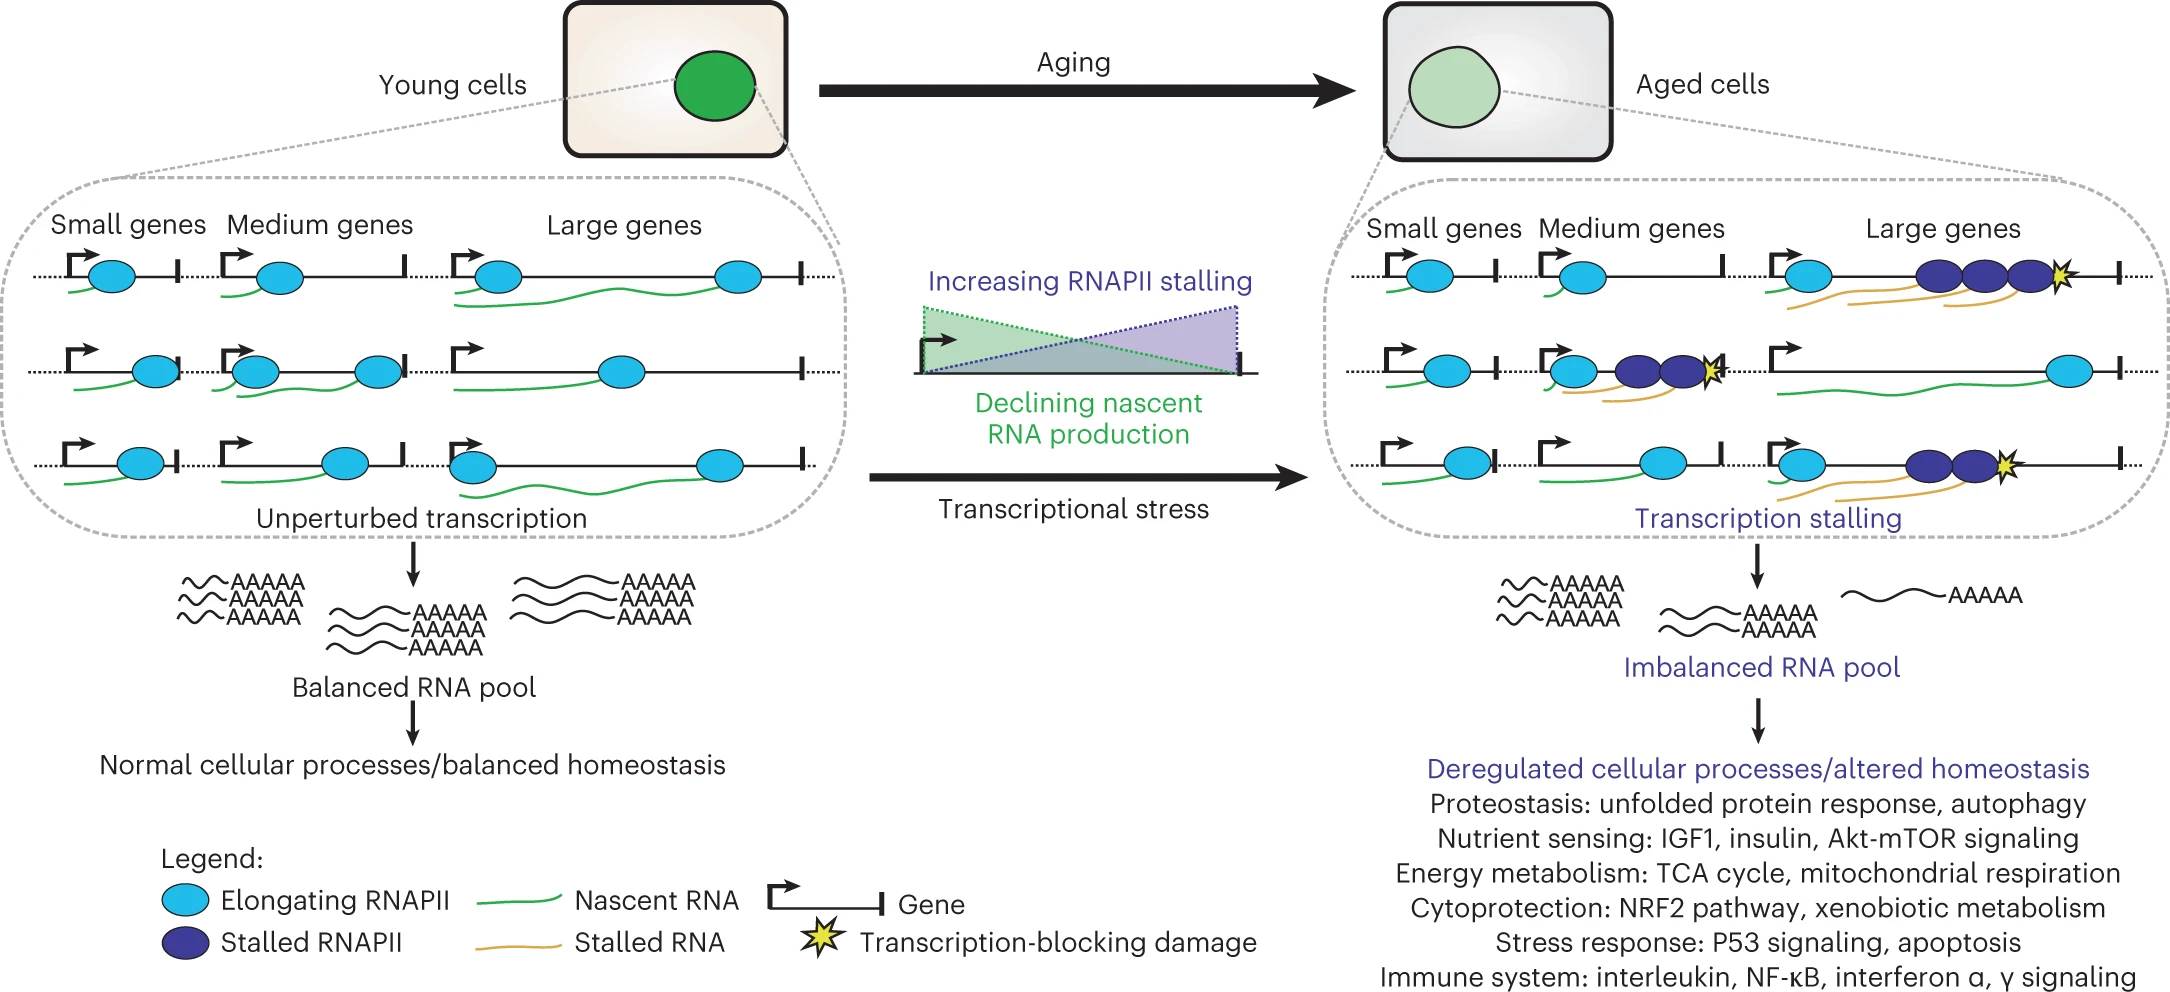 ../_images/Age-related_transcriptional_stress_model.png